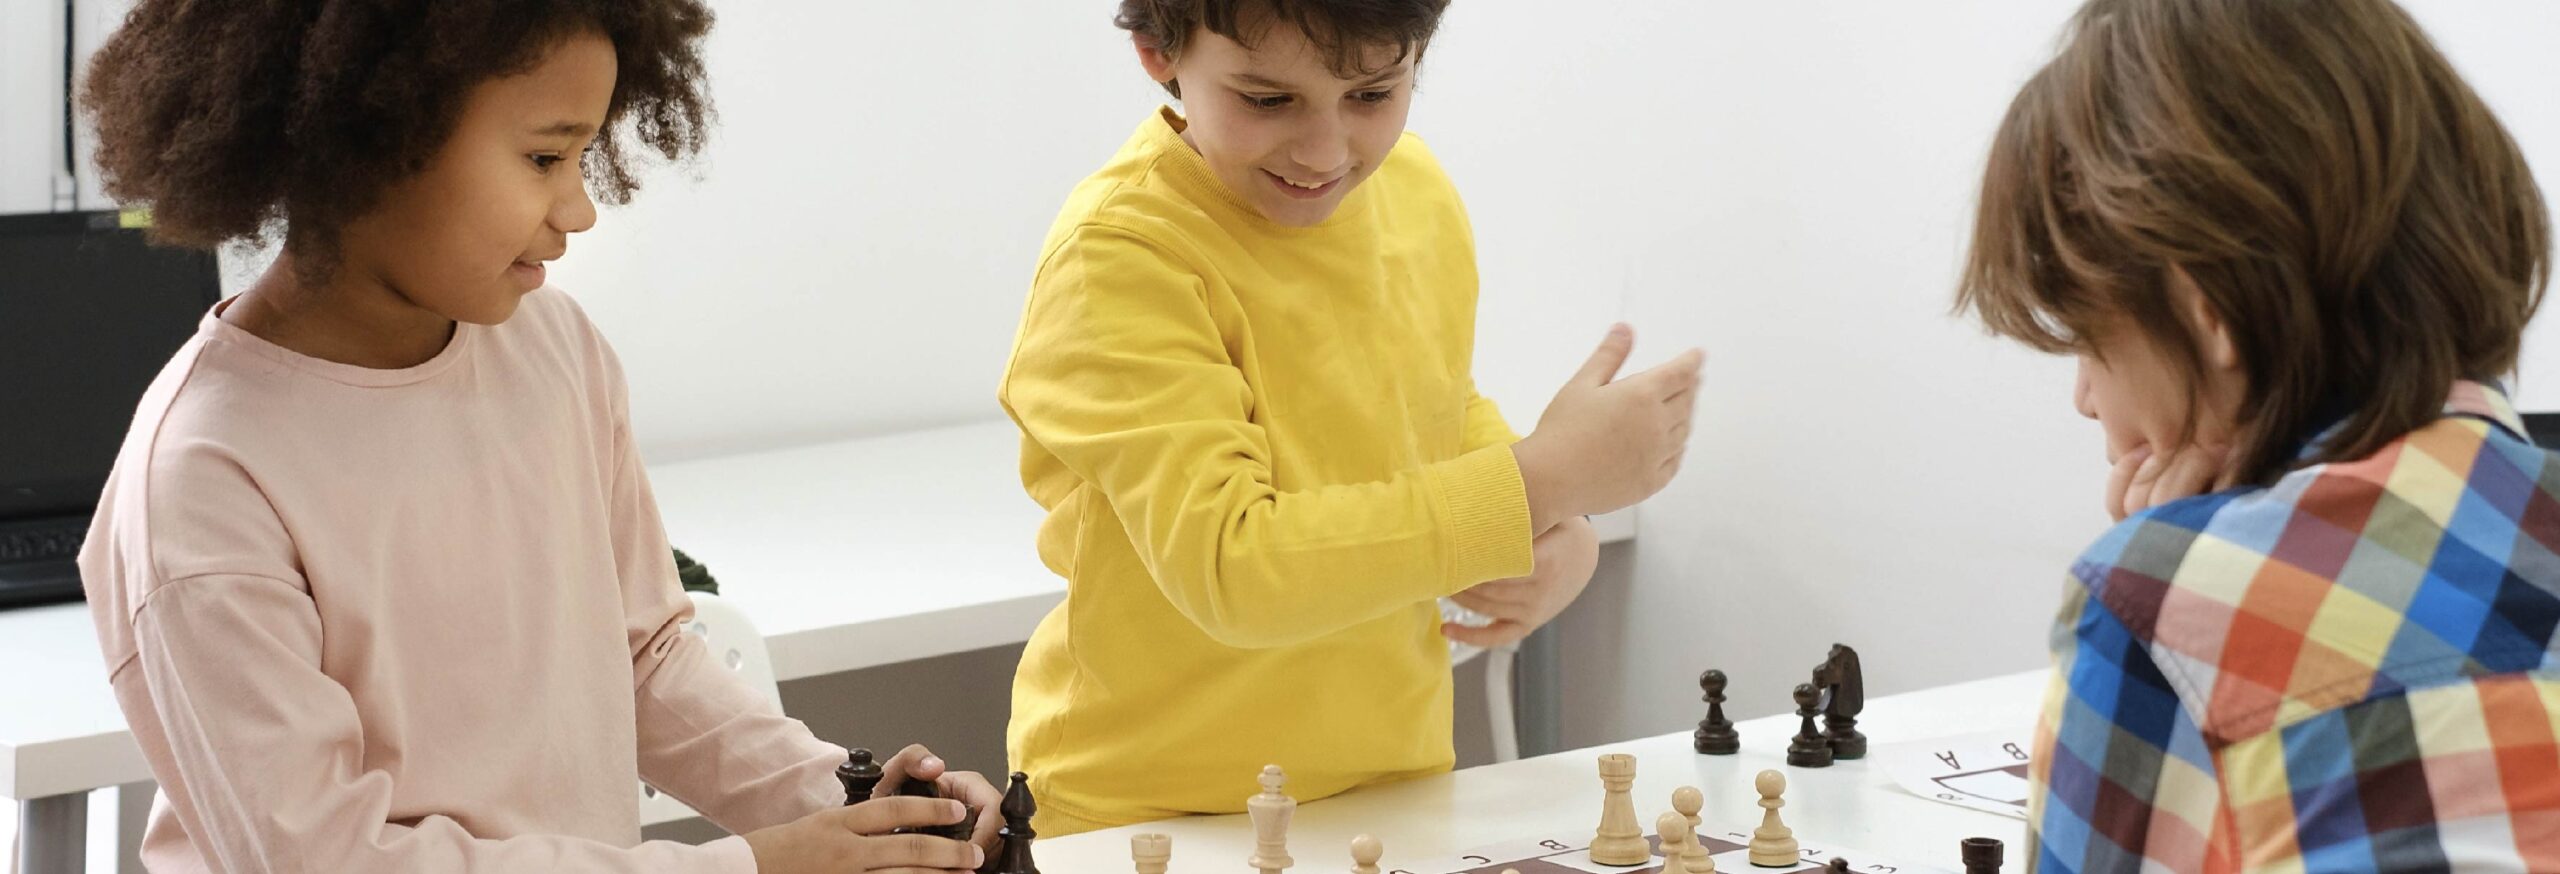 DIG Chess Classes at the Westport Weston Family YMCA